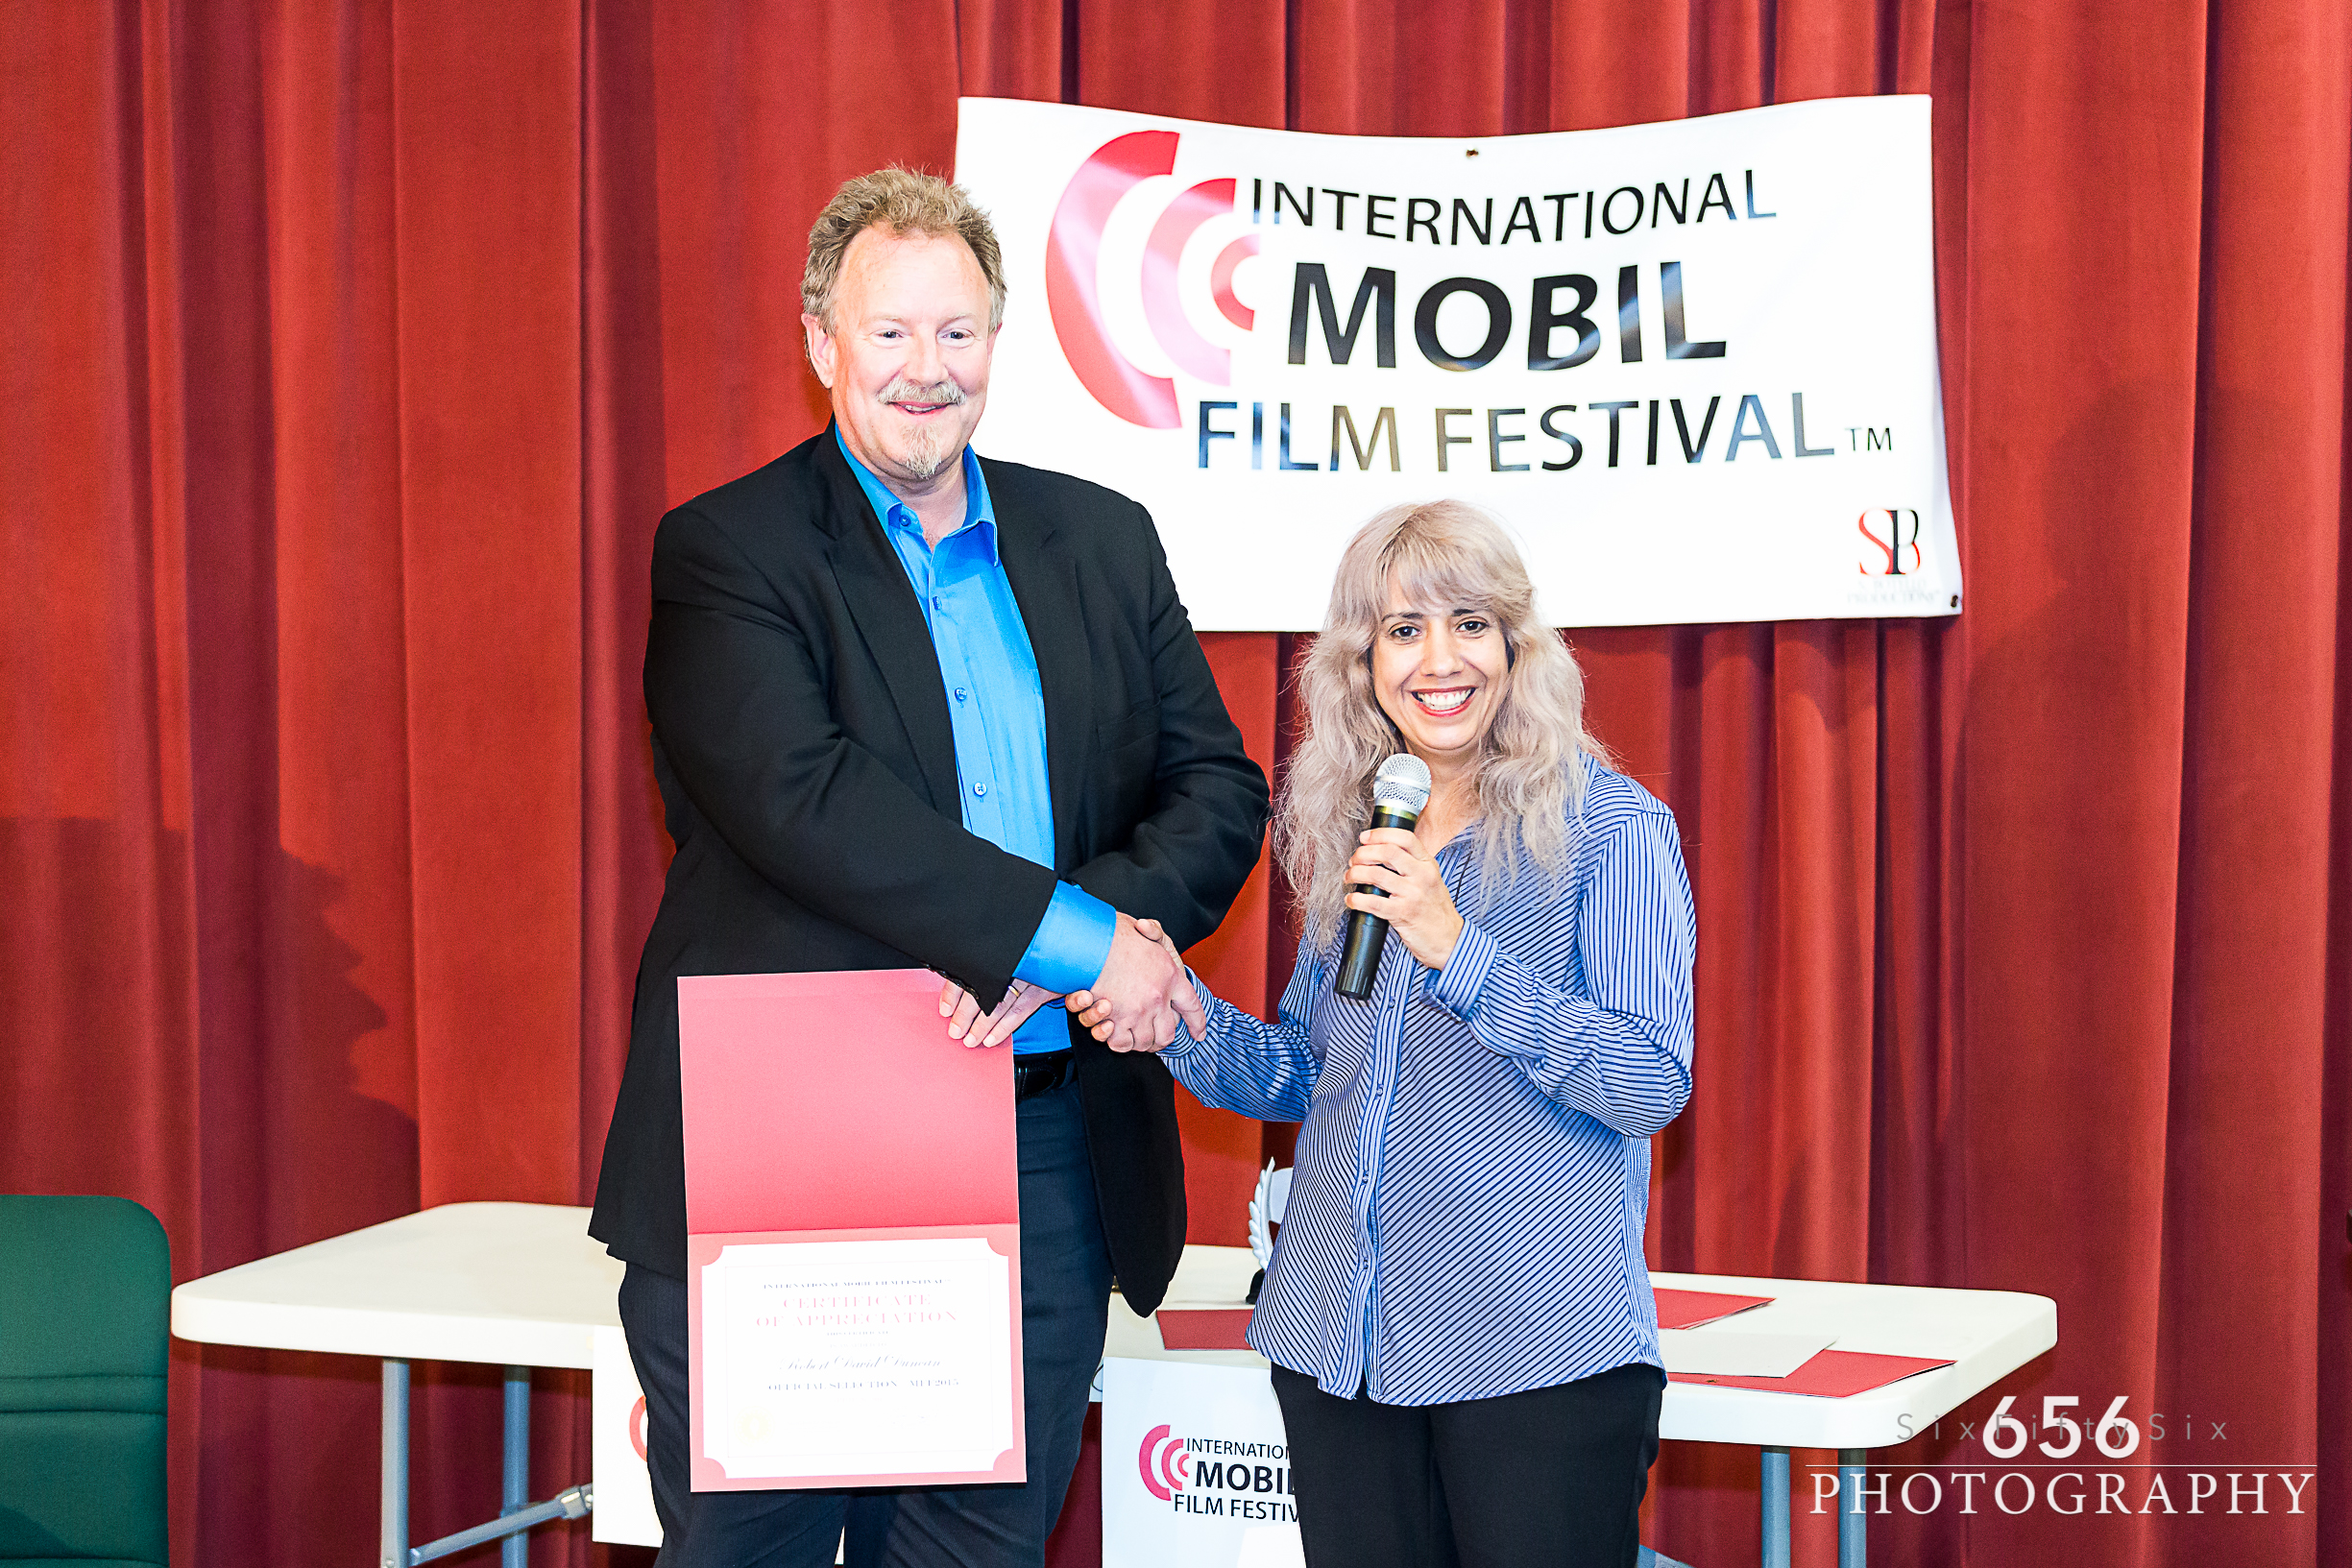 Robert David Duncan at the Mobil Film Festival (with Susan Botello)